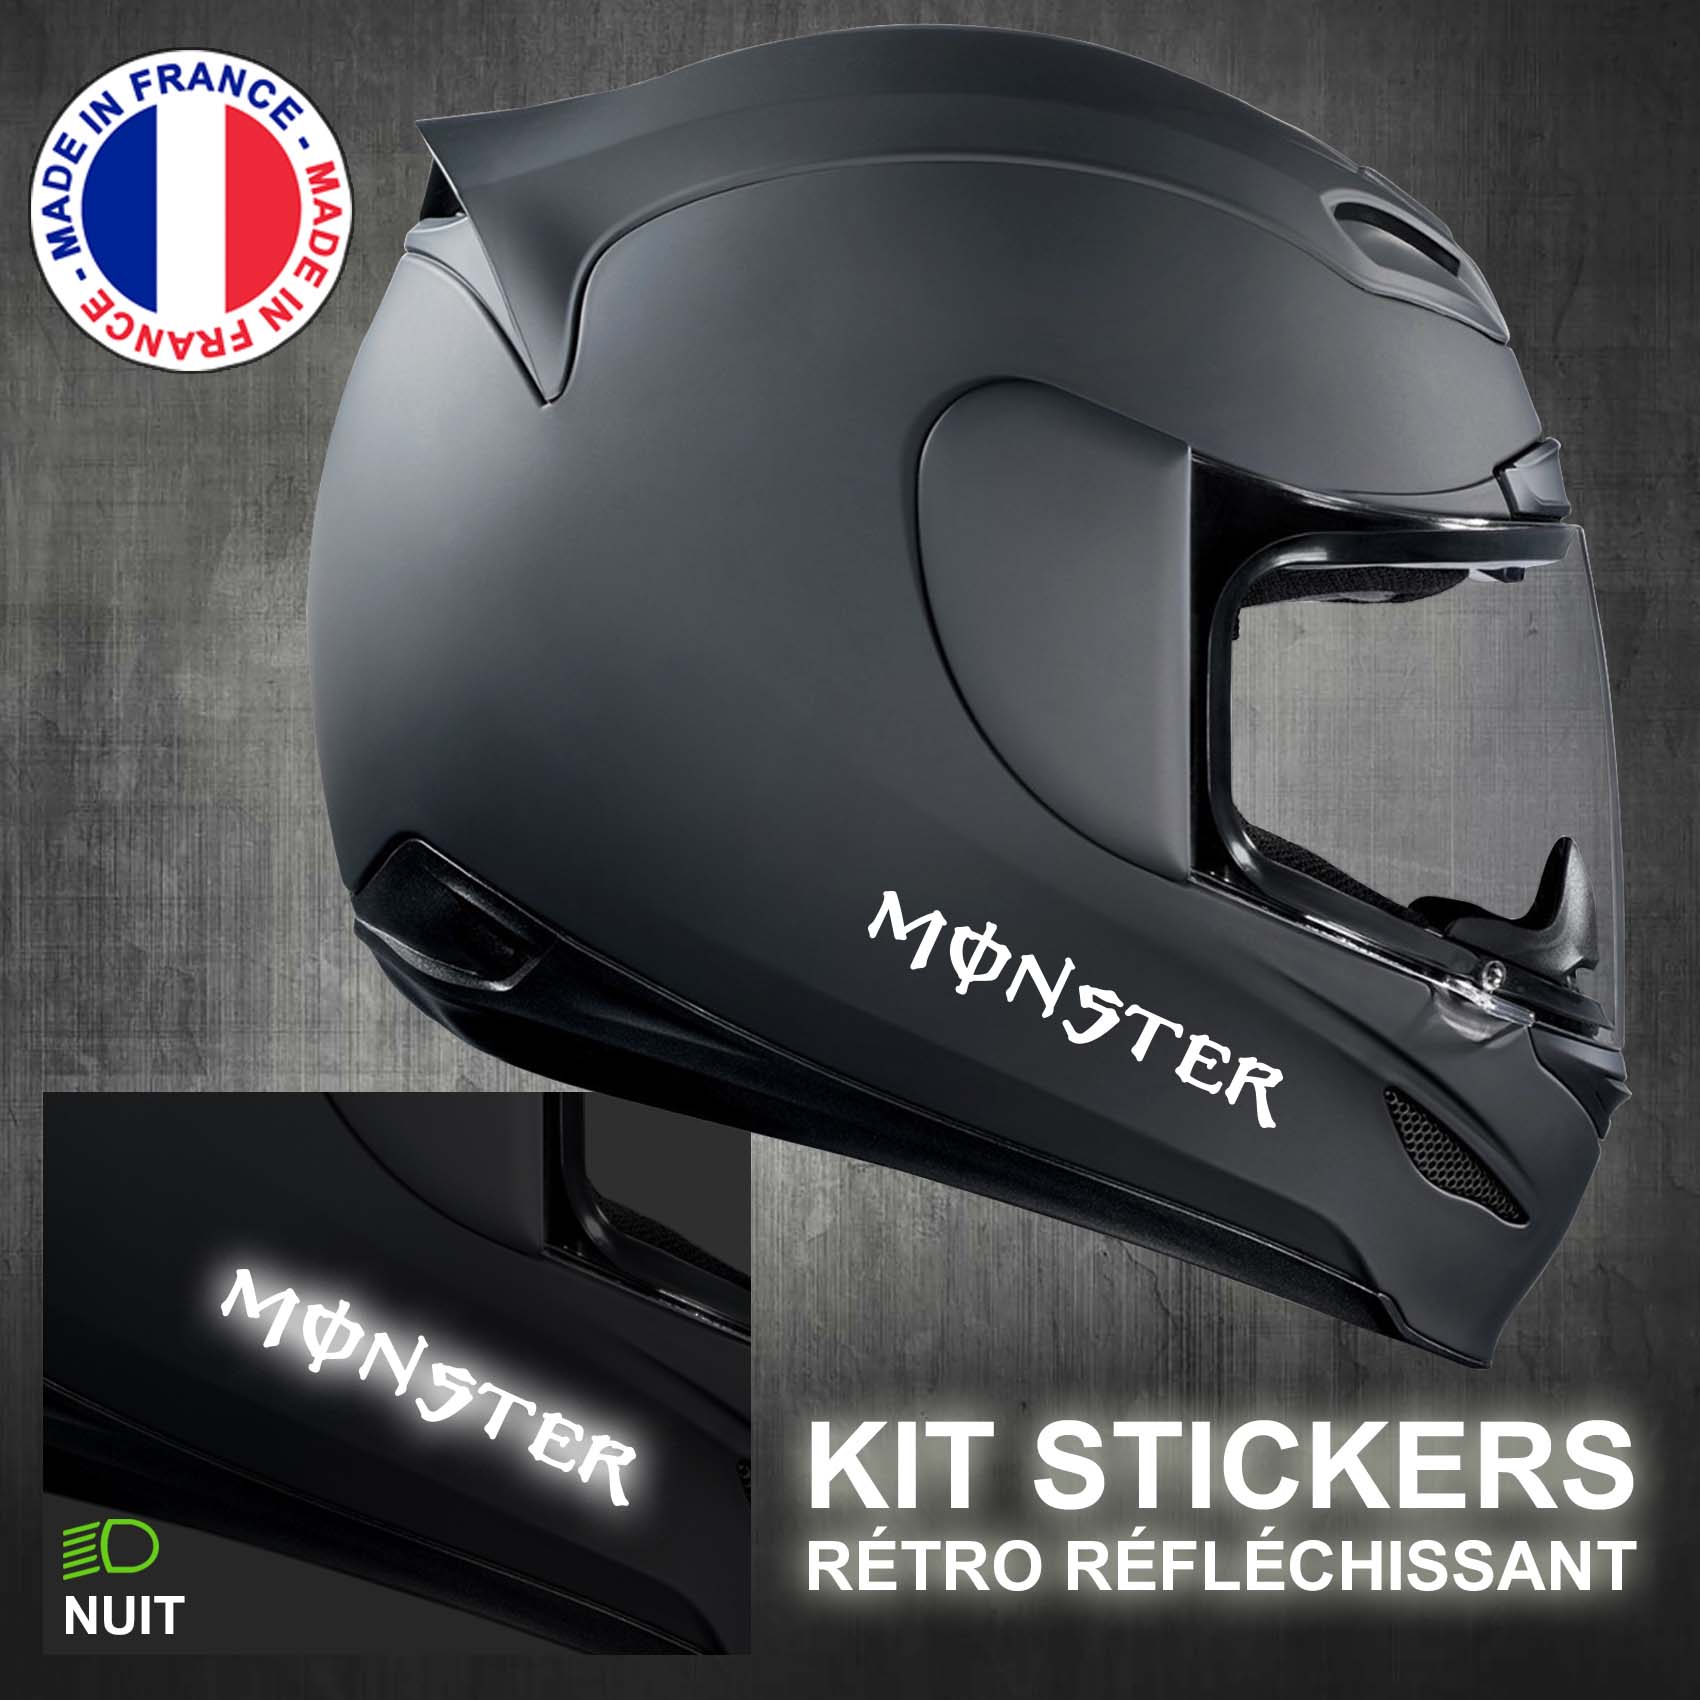 stickers-casque-moto-monster-ref3-retro-reflechissant-autocollant-noir-moto-velo-tuning-racing-route-sticker-casques-adhesif-scooter-nuit-securite-decals-personnalise-personnalisable-min